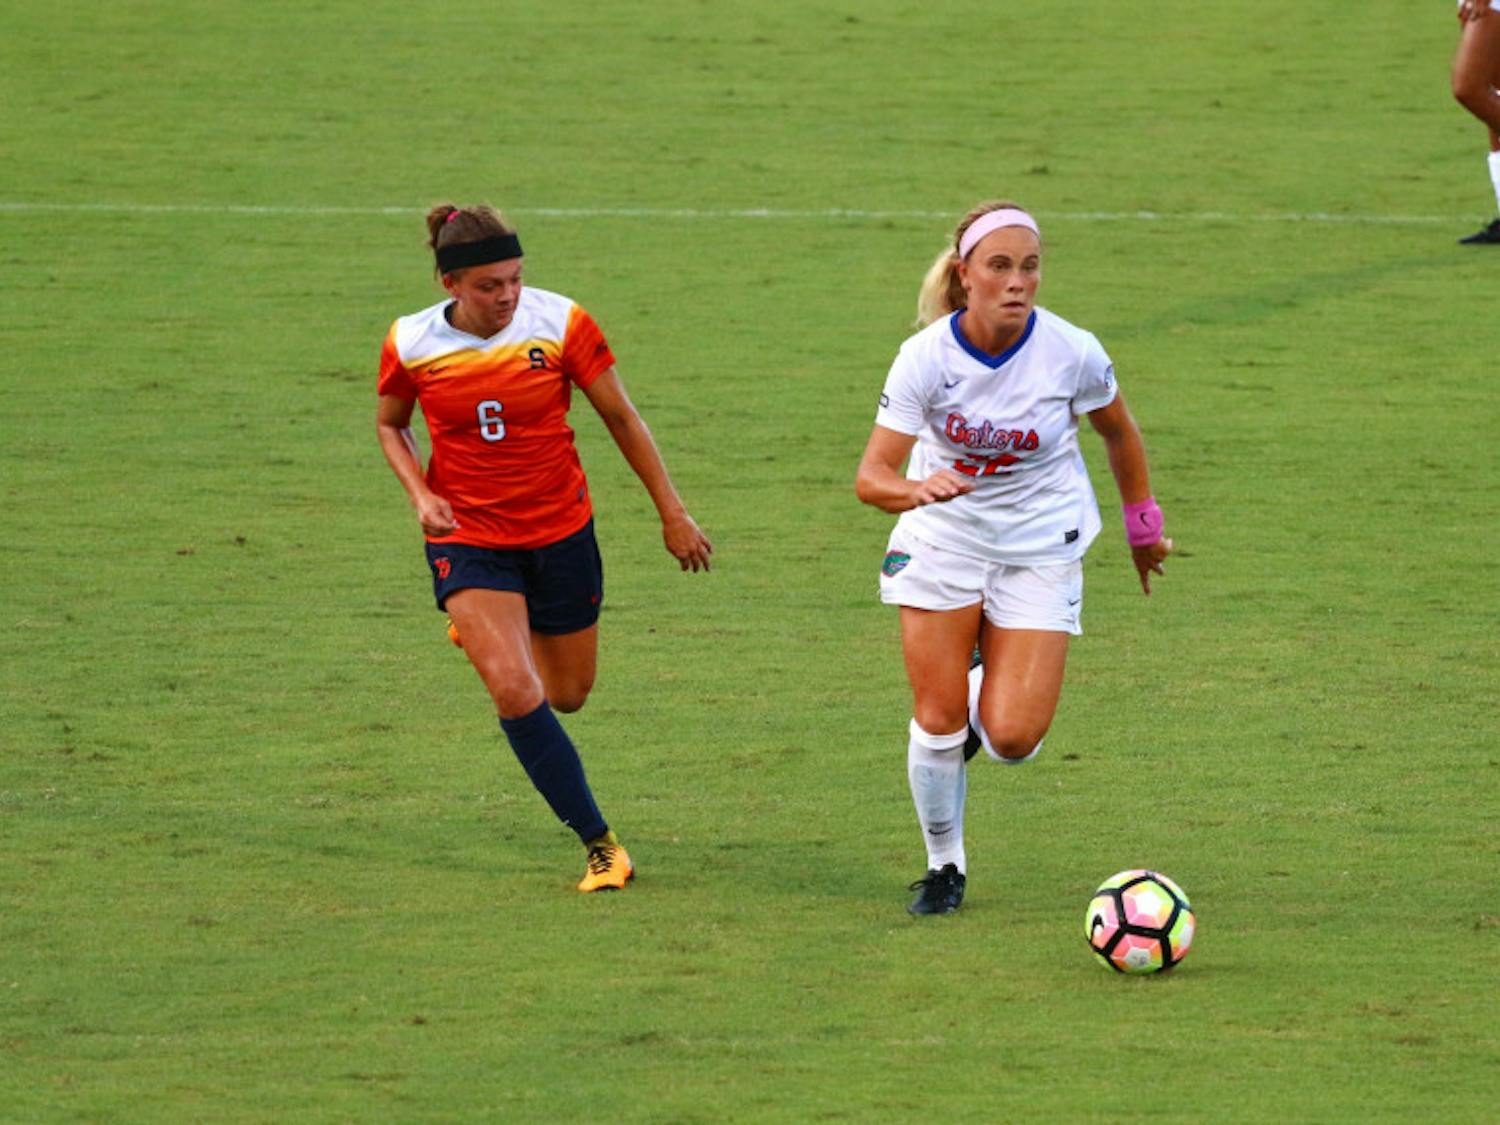 UF midfielder Parker Roberts runs with the ball during Florida's 2-1 win against Syracuse on Aug. 27, 2017, at Donald R. Dizney Stadium.